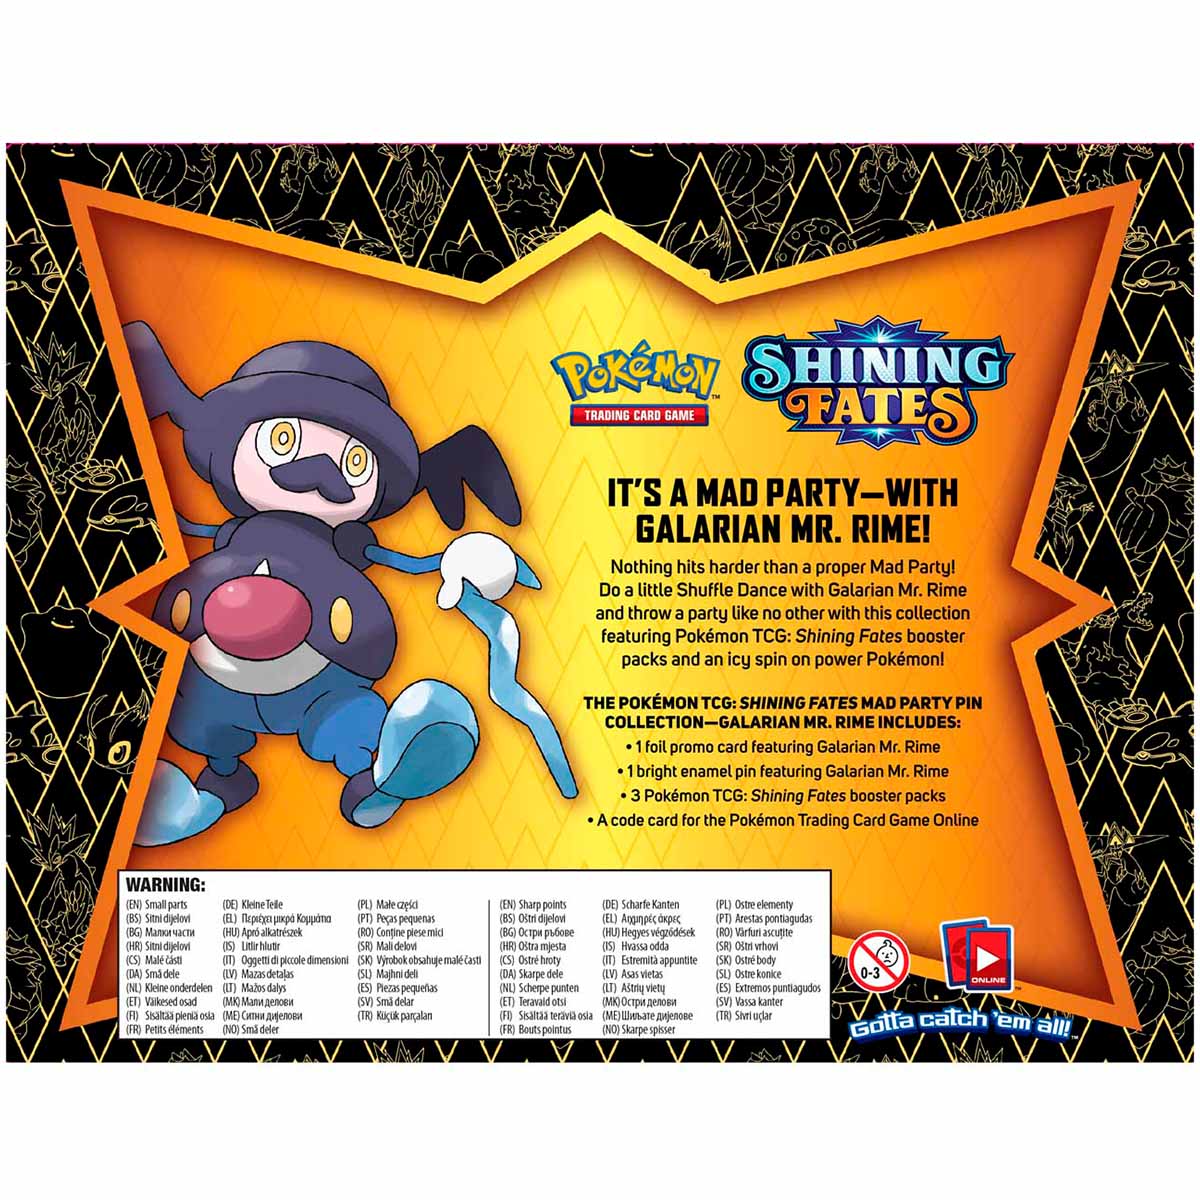 Pokémon - Shining Fates Mad Party Pin Collection - Galarian Mr. Rime